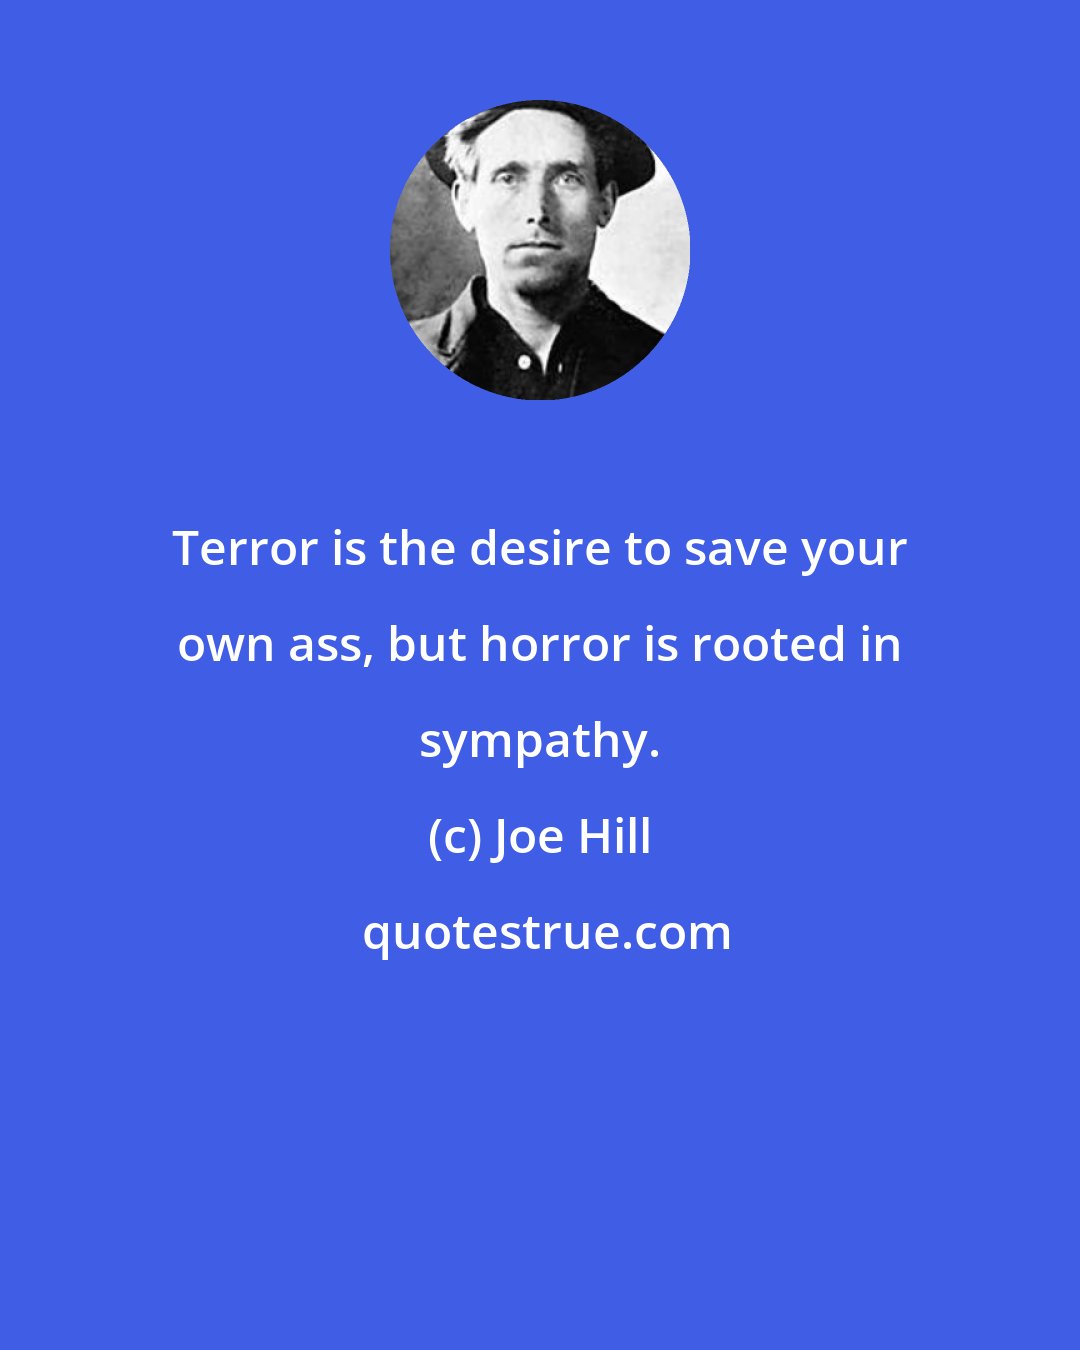 Joe Hill: Terror is the desire to save your own ass, but horror is rooted in sympathy.